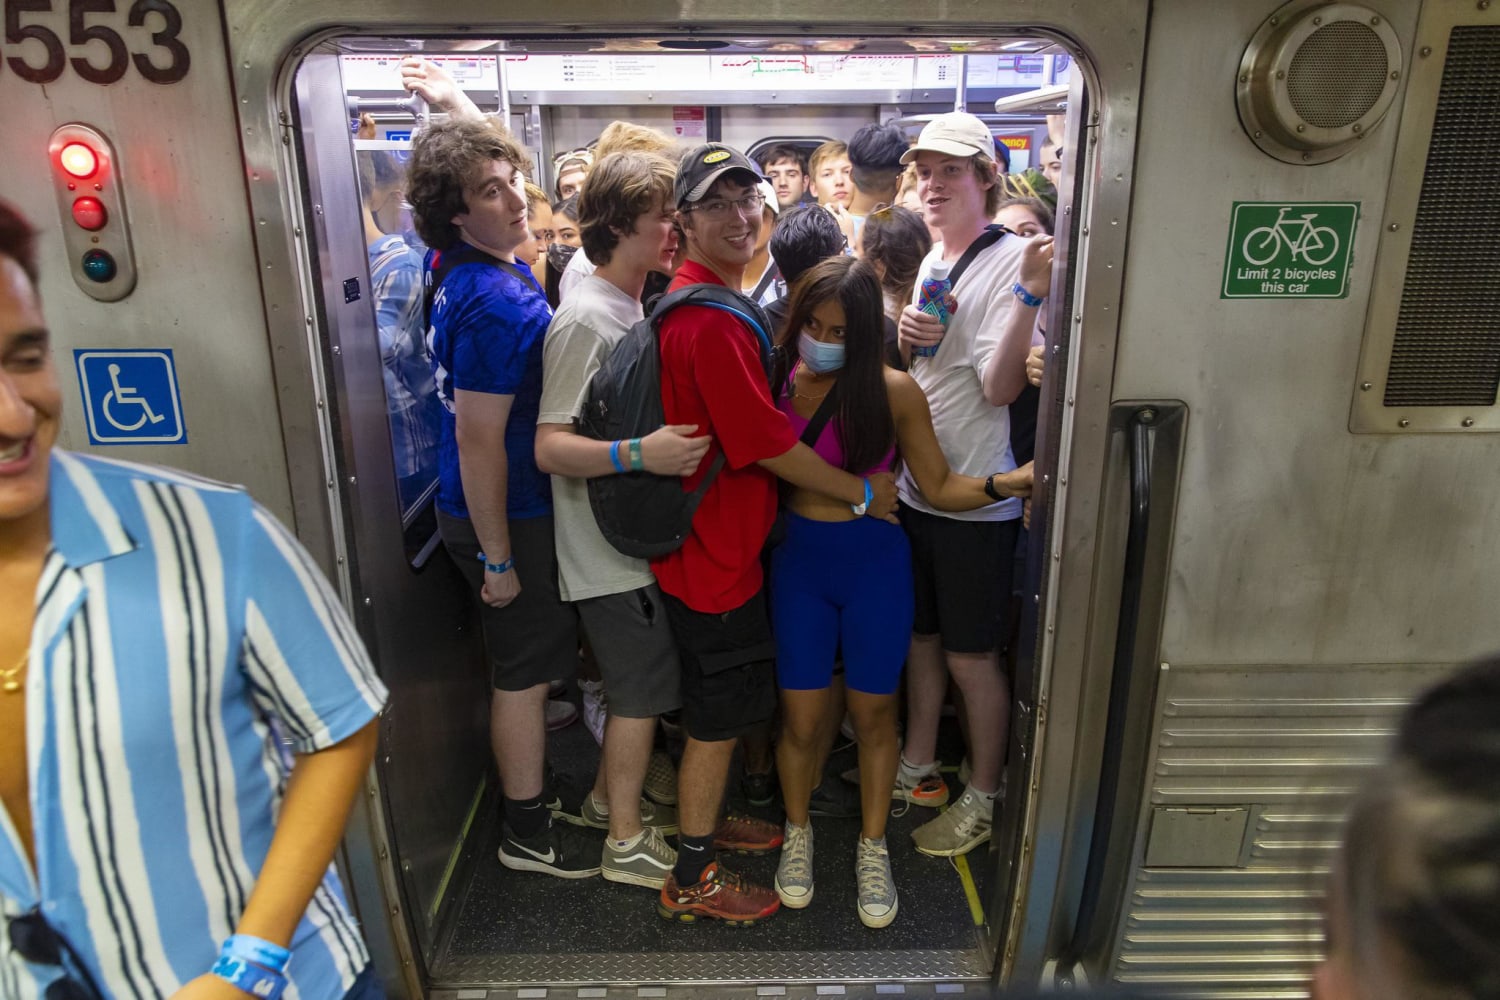 Crowded Subway full of people headed to Lollapalooza without masks despite a federal mask mandate